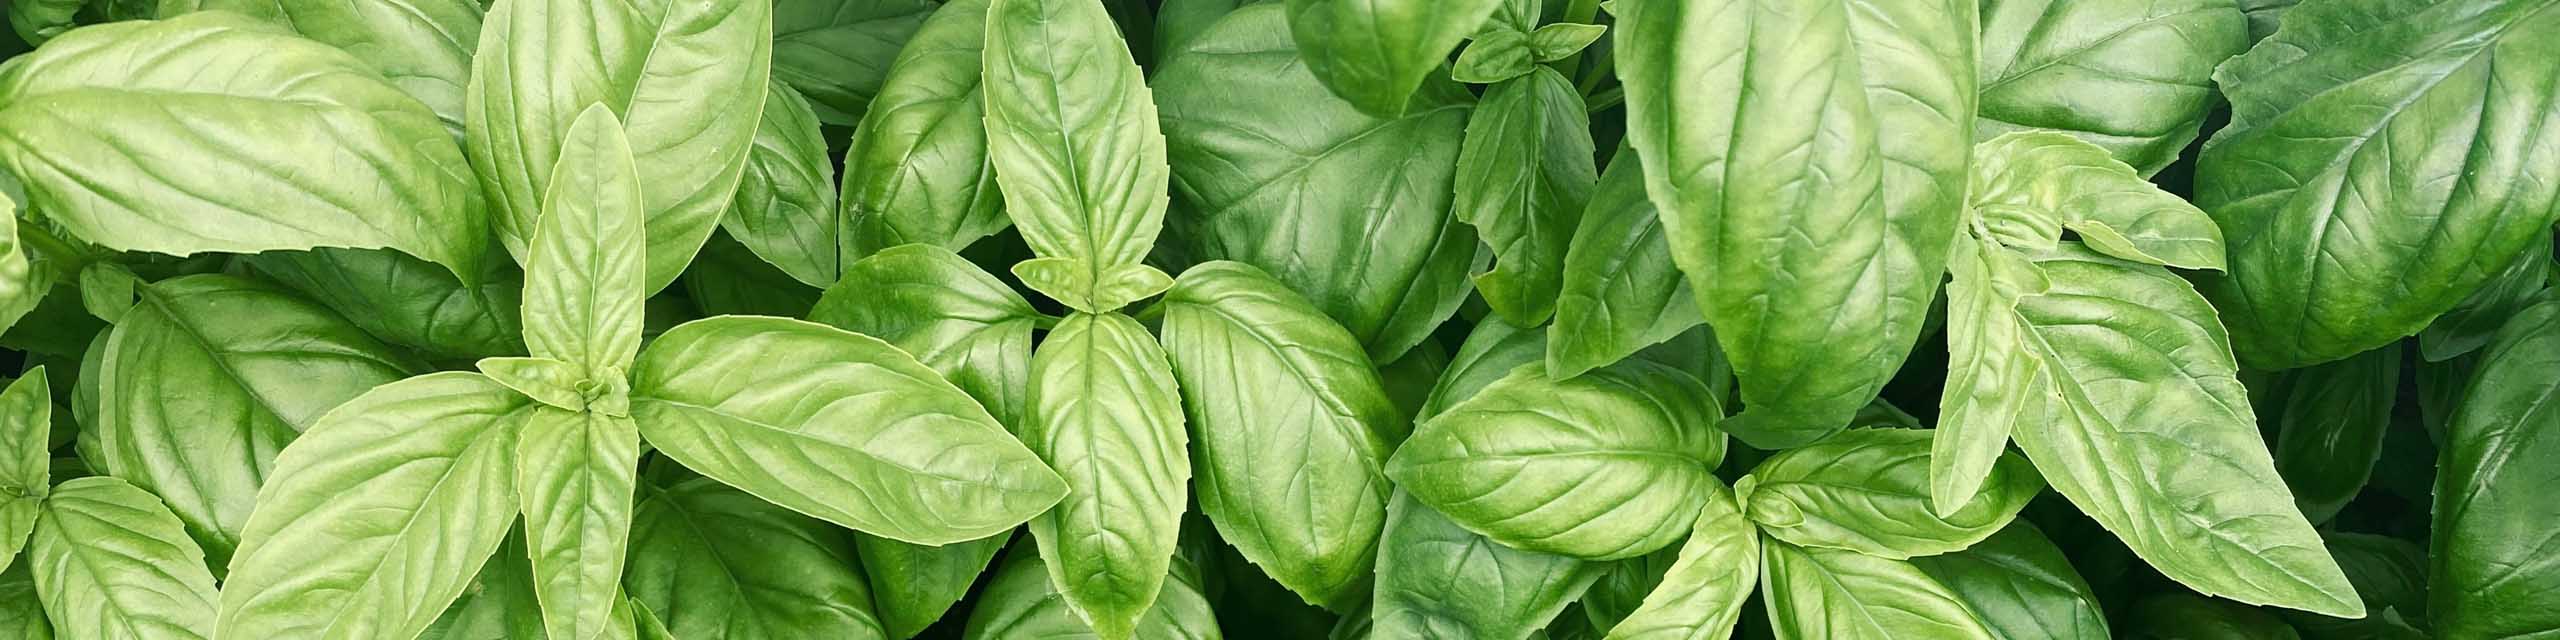 Top down view of sweet basil plants.